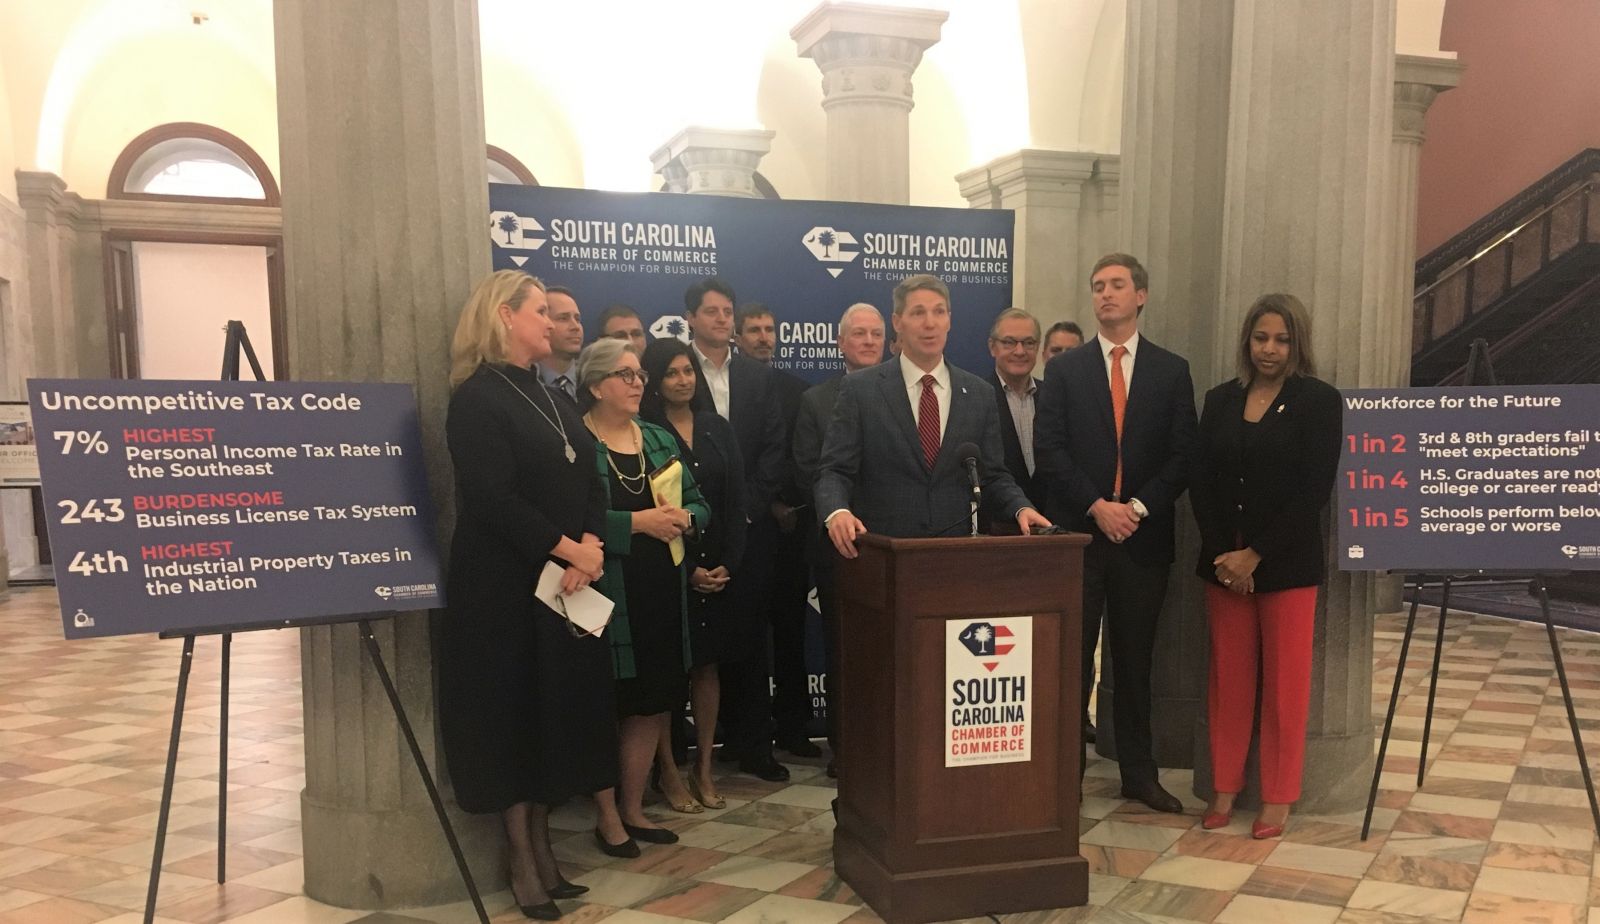 The S.C. Chamber of Commerce outlined a 2020 competitiveness agenda focusing on tax and education reform on Monday. (Photo/Renee Sexton)